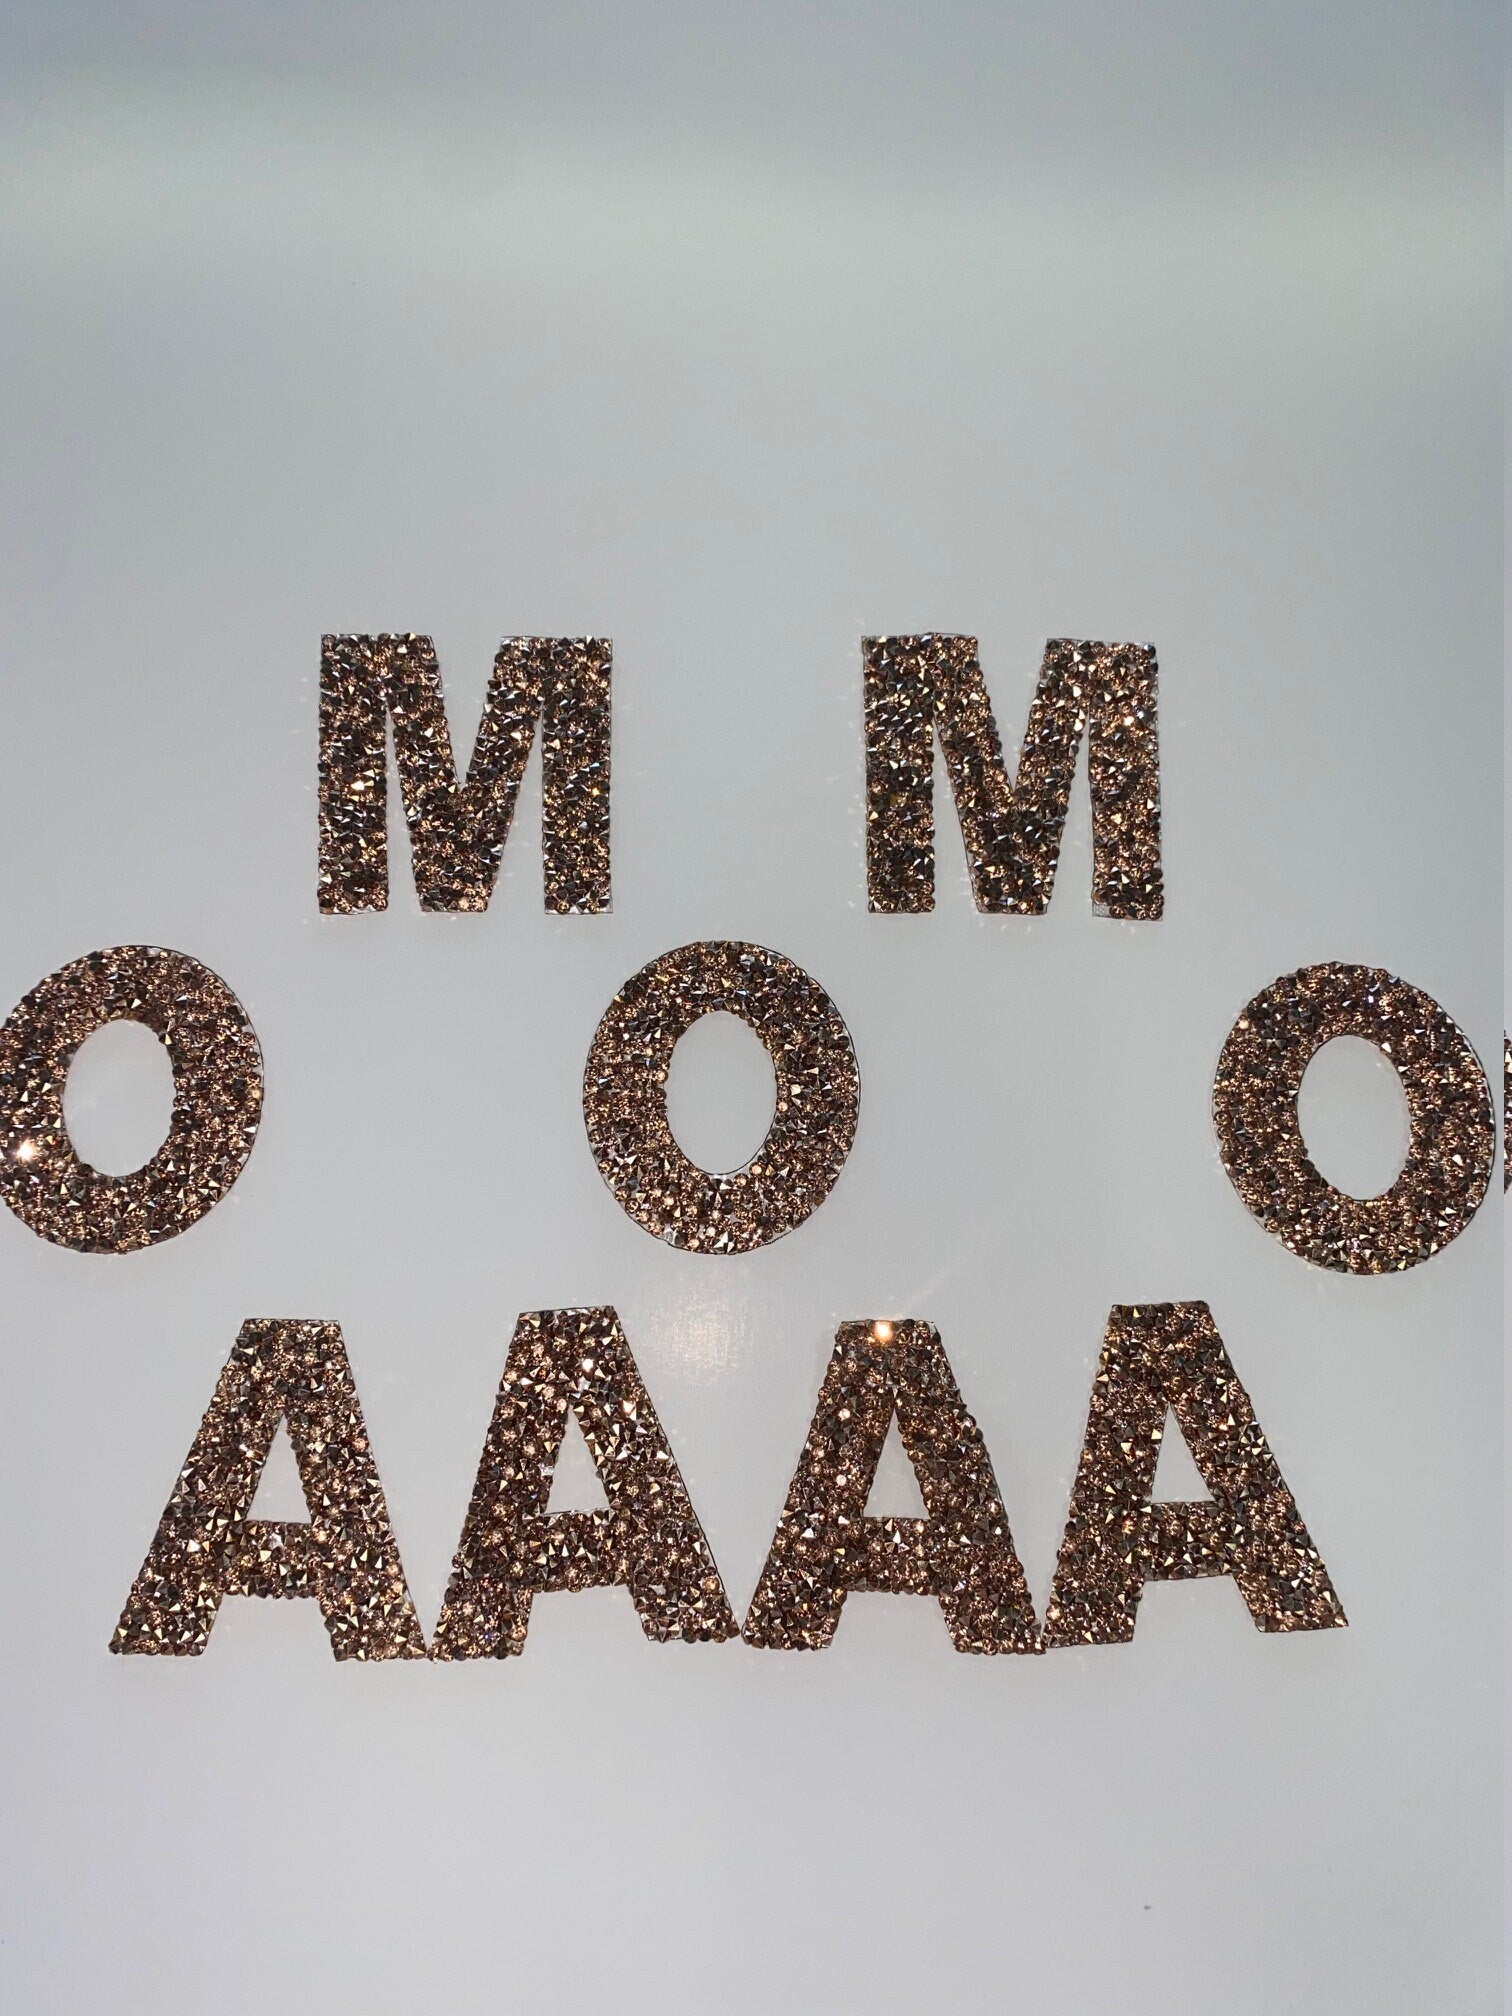 Hotfix Rhinestone Letters, ROSE GOLD(1 pc), NEW, Choose Your Letter, Rhinestone Patch with Adhesive, Mesh Bling Letters, Size 2.28"